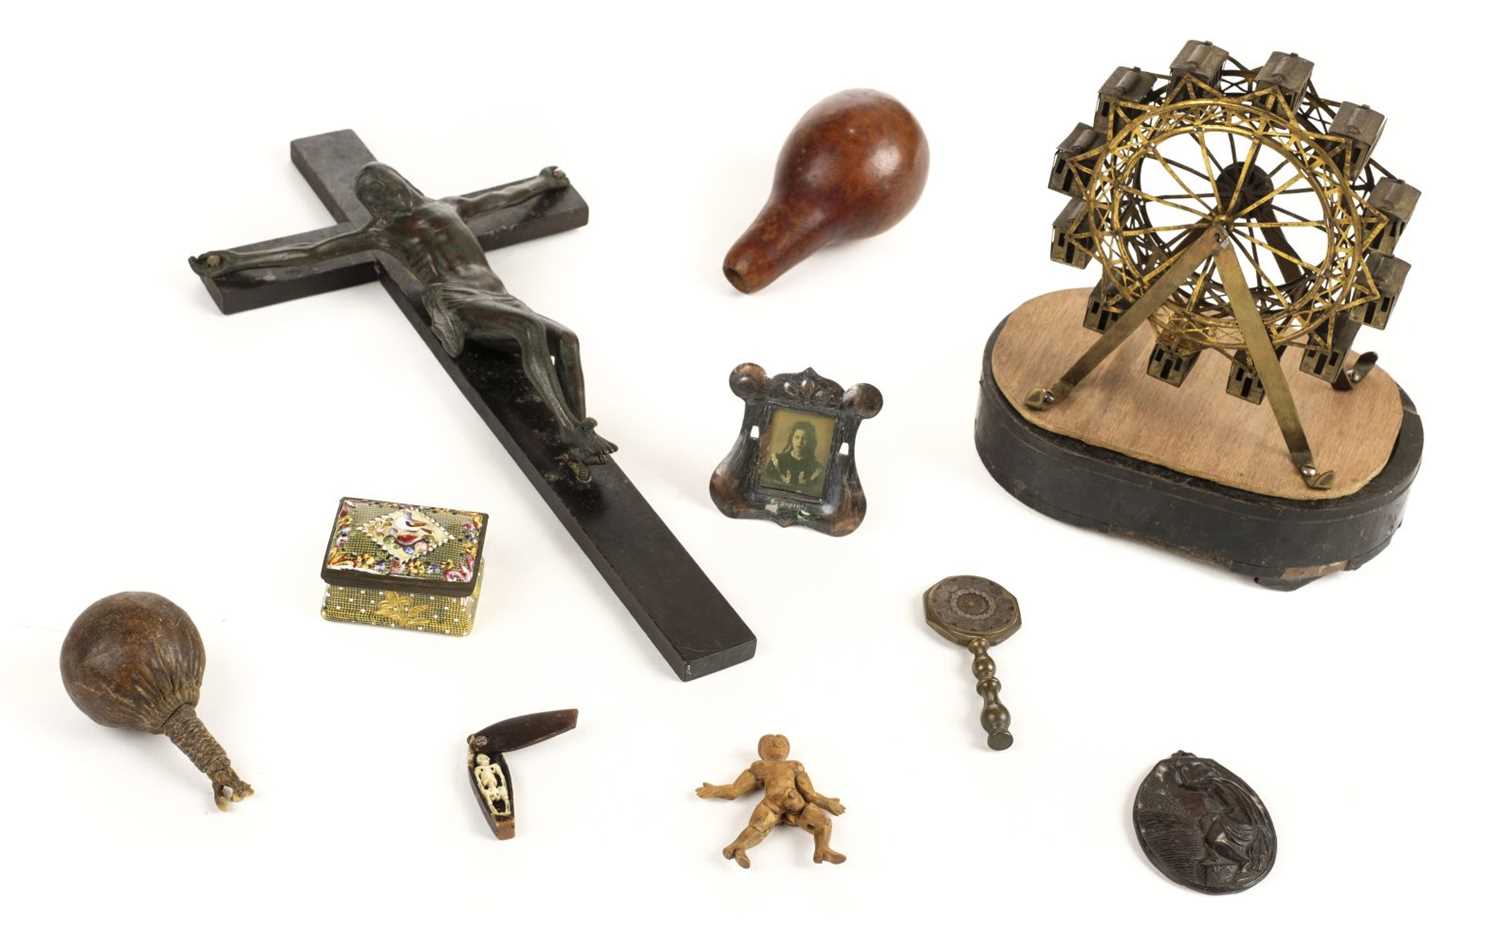 Lot 111 - Doll. An 18th century miniature wooden doll and other items